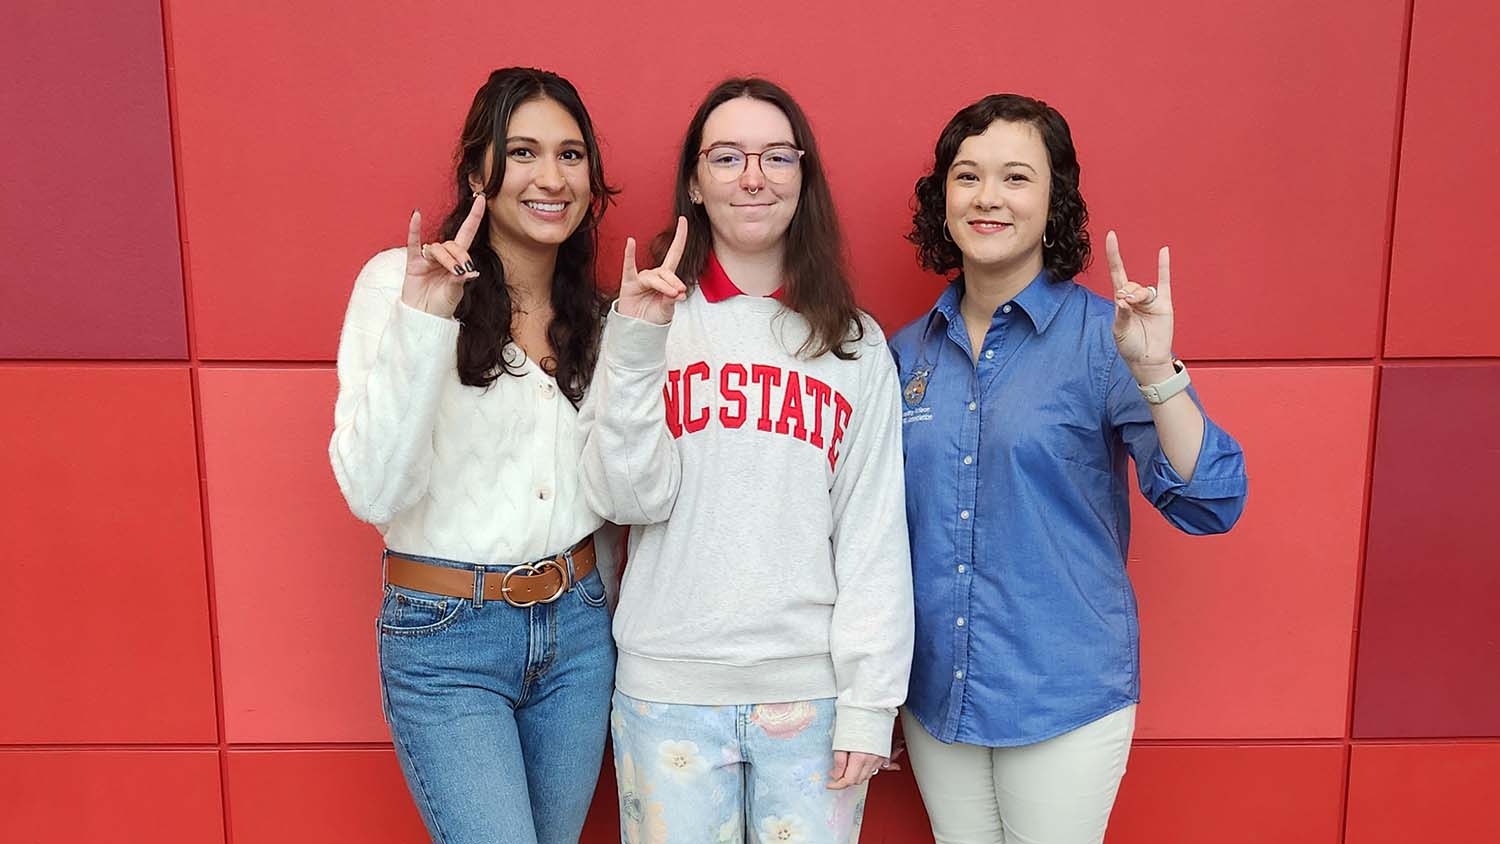 Three young woman posing in front of a red patterned wall